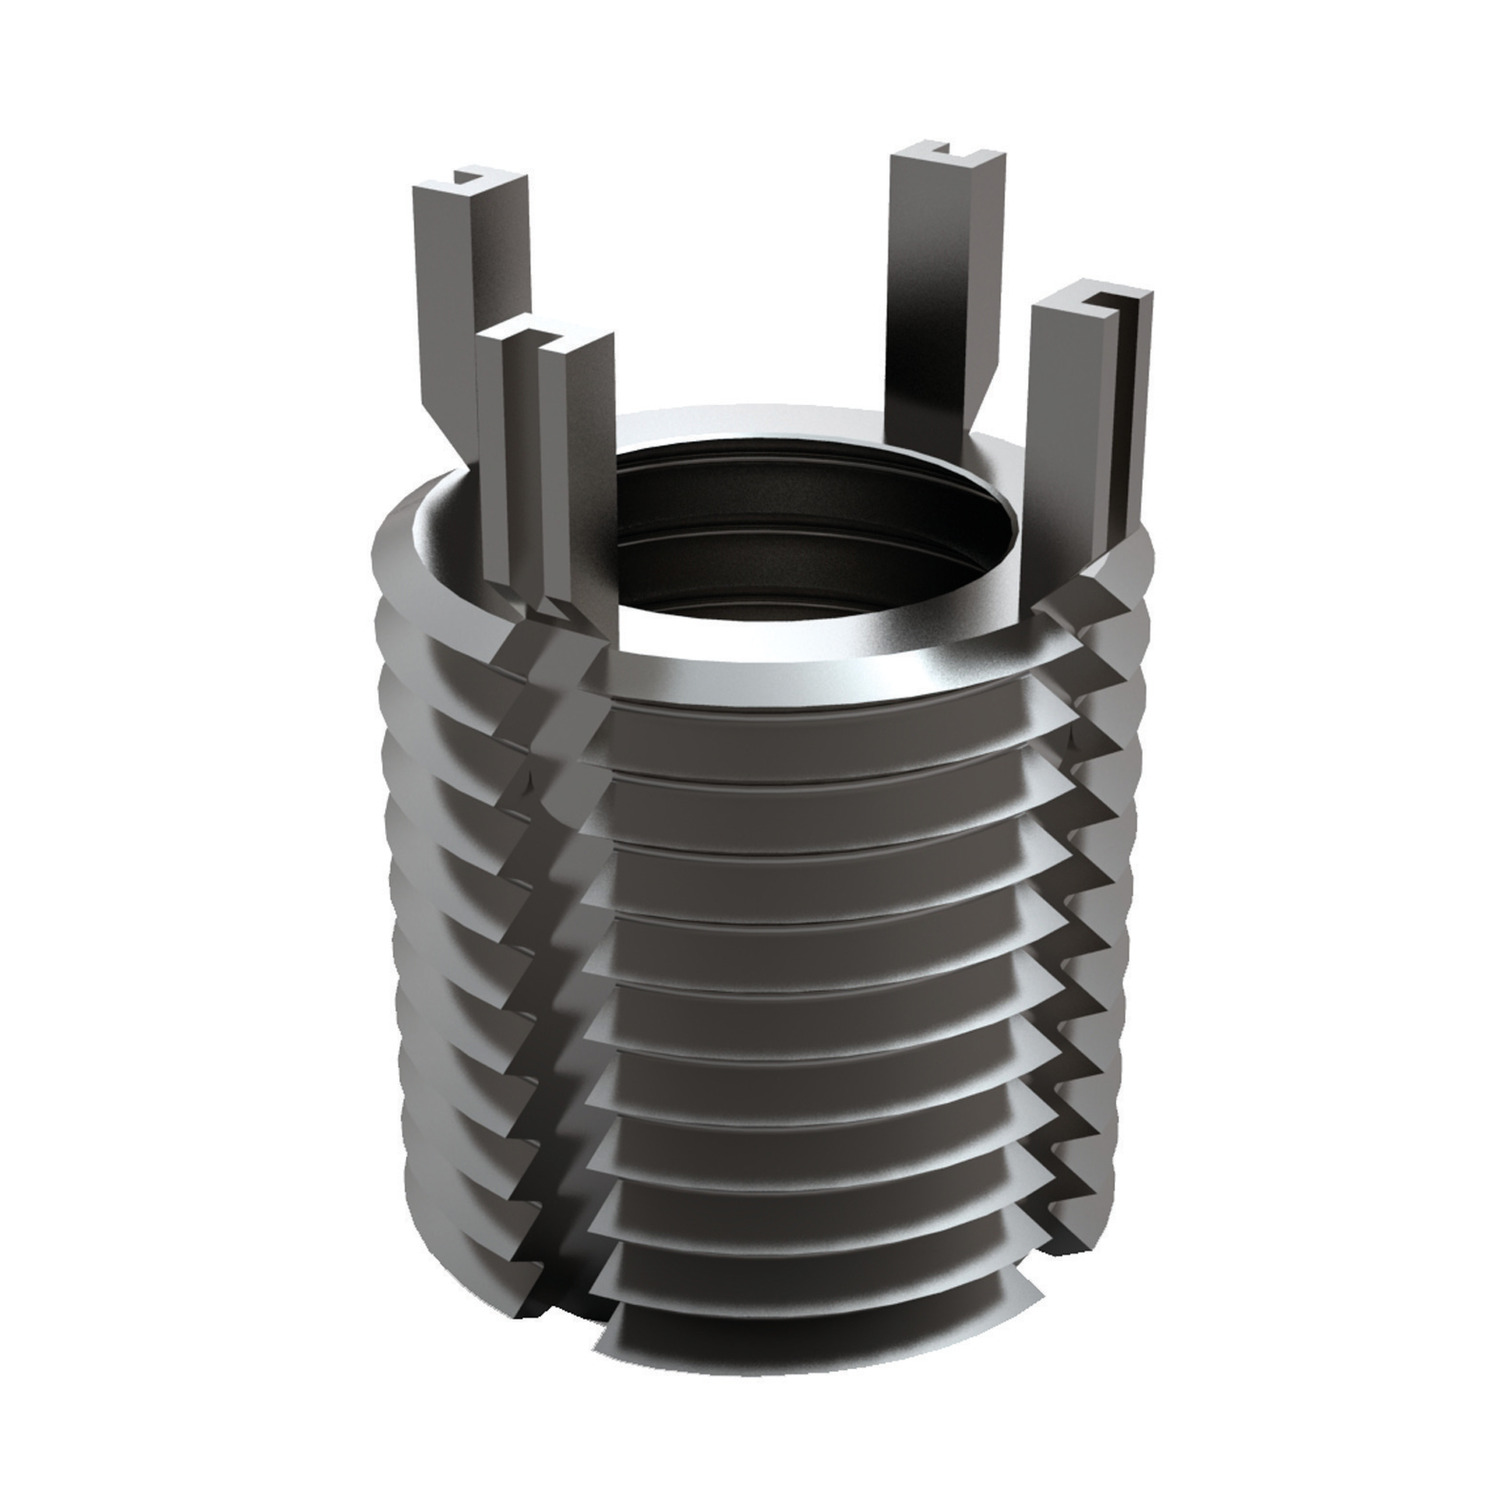 Threaded Insert - Metric Metric, carbon steel threaded inserts for heavy duty applications. Wide range of sizes available.